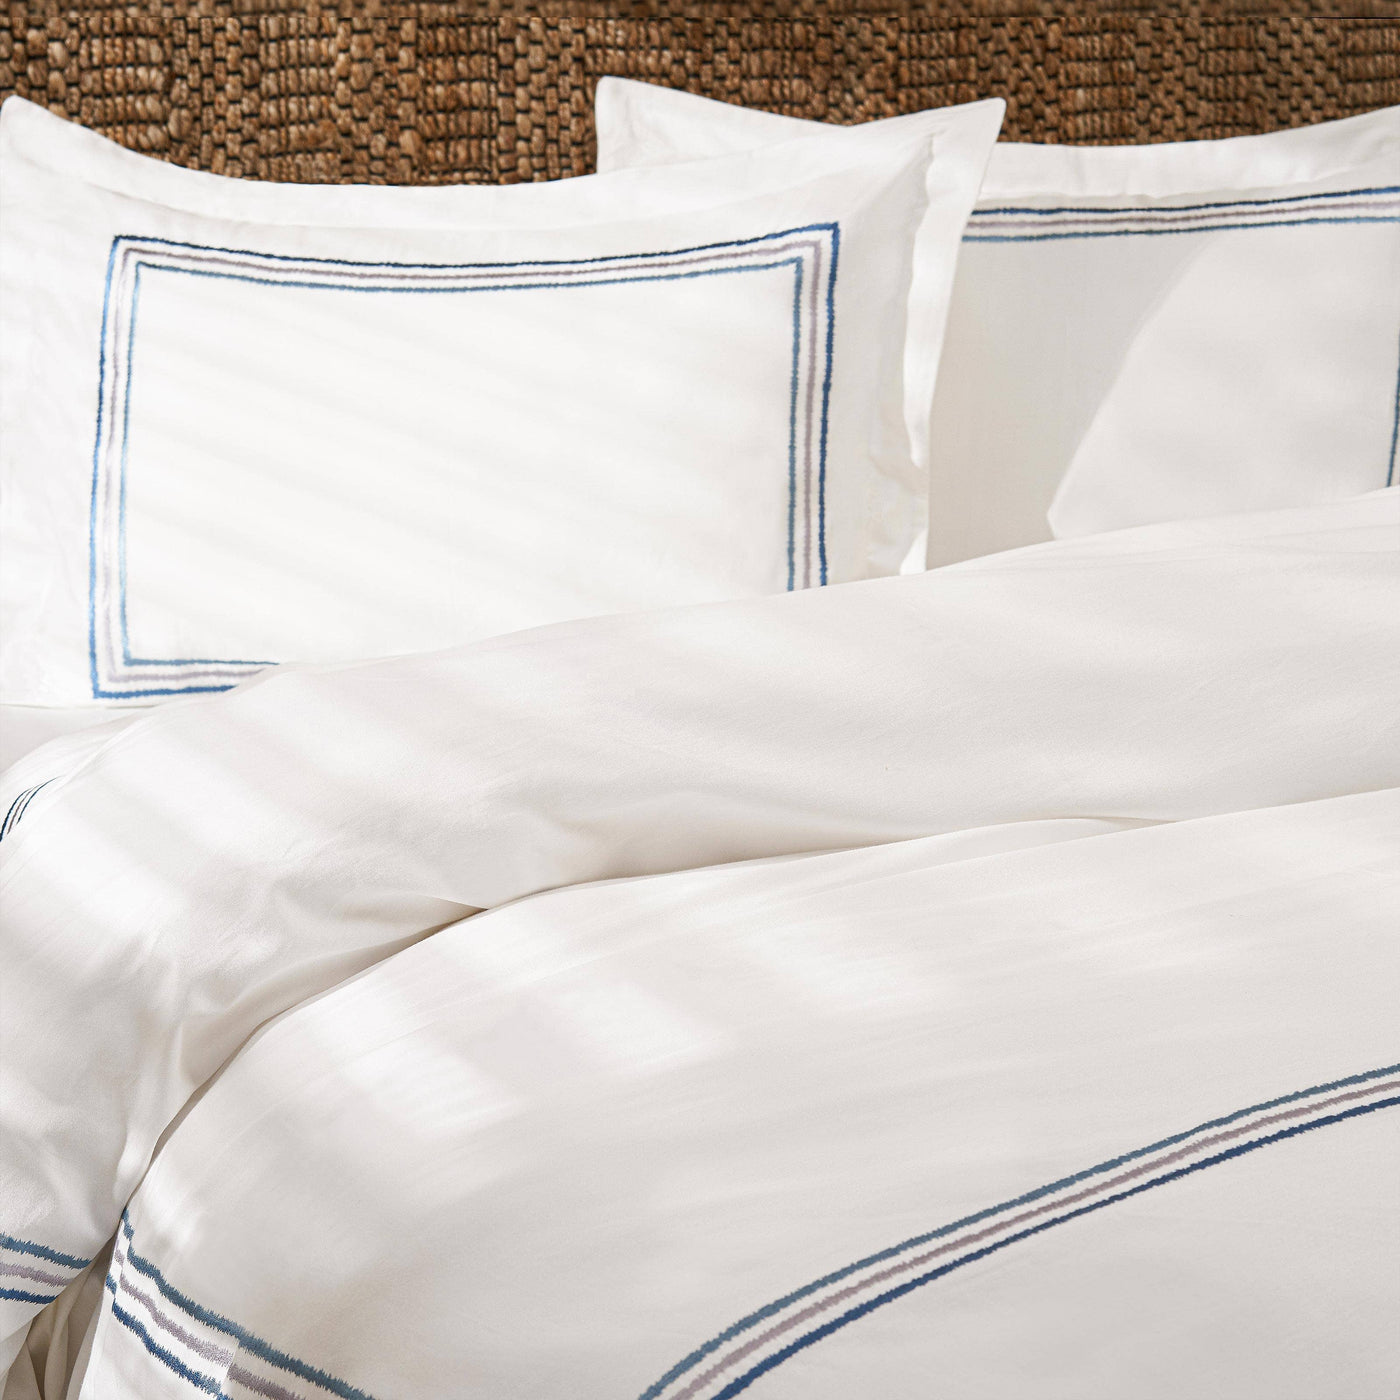 Darcy Embroidered 100% Turkish Cotton 210 TC Duvet Cover + Fitted Sheet + 4 Pillowcases, White - Blue, Super King Size Bedding Sets sazy.com